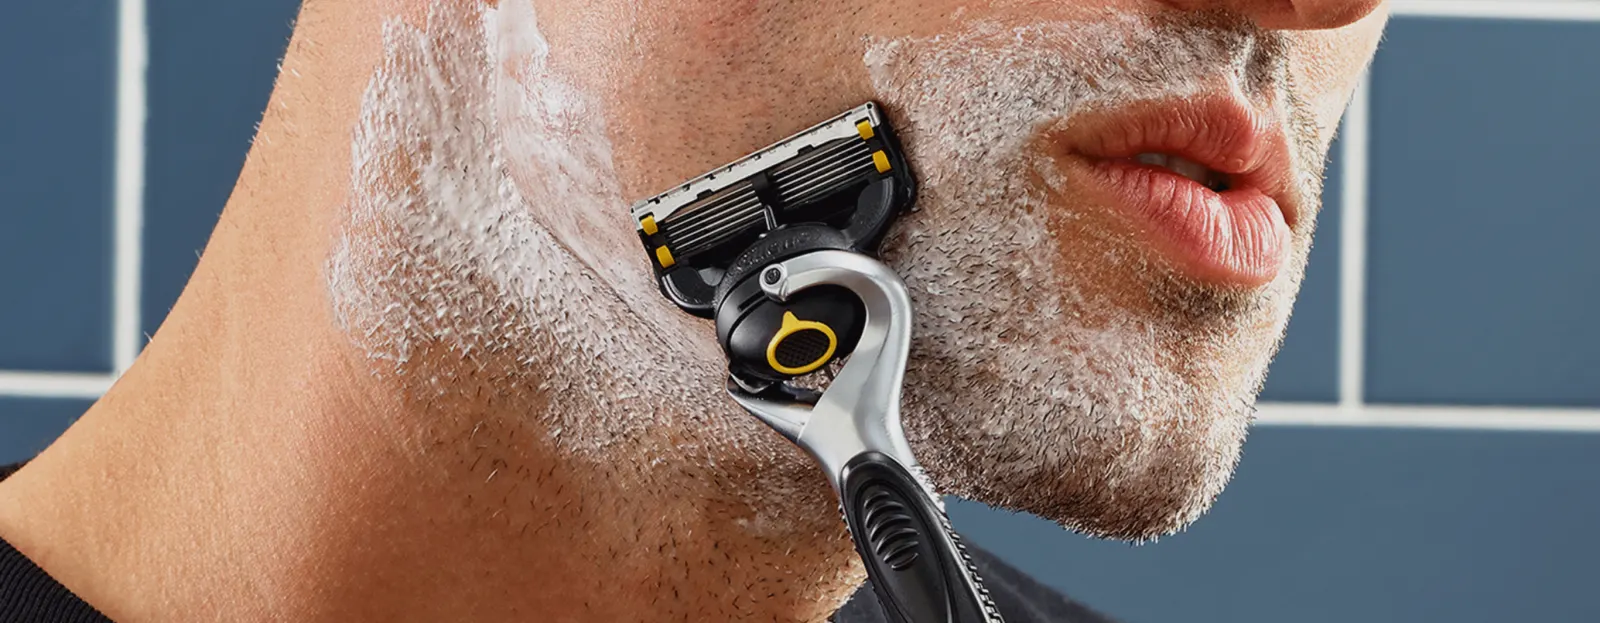 Helping prevent shaving rash: All about lubrication